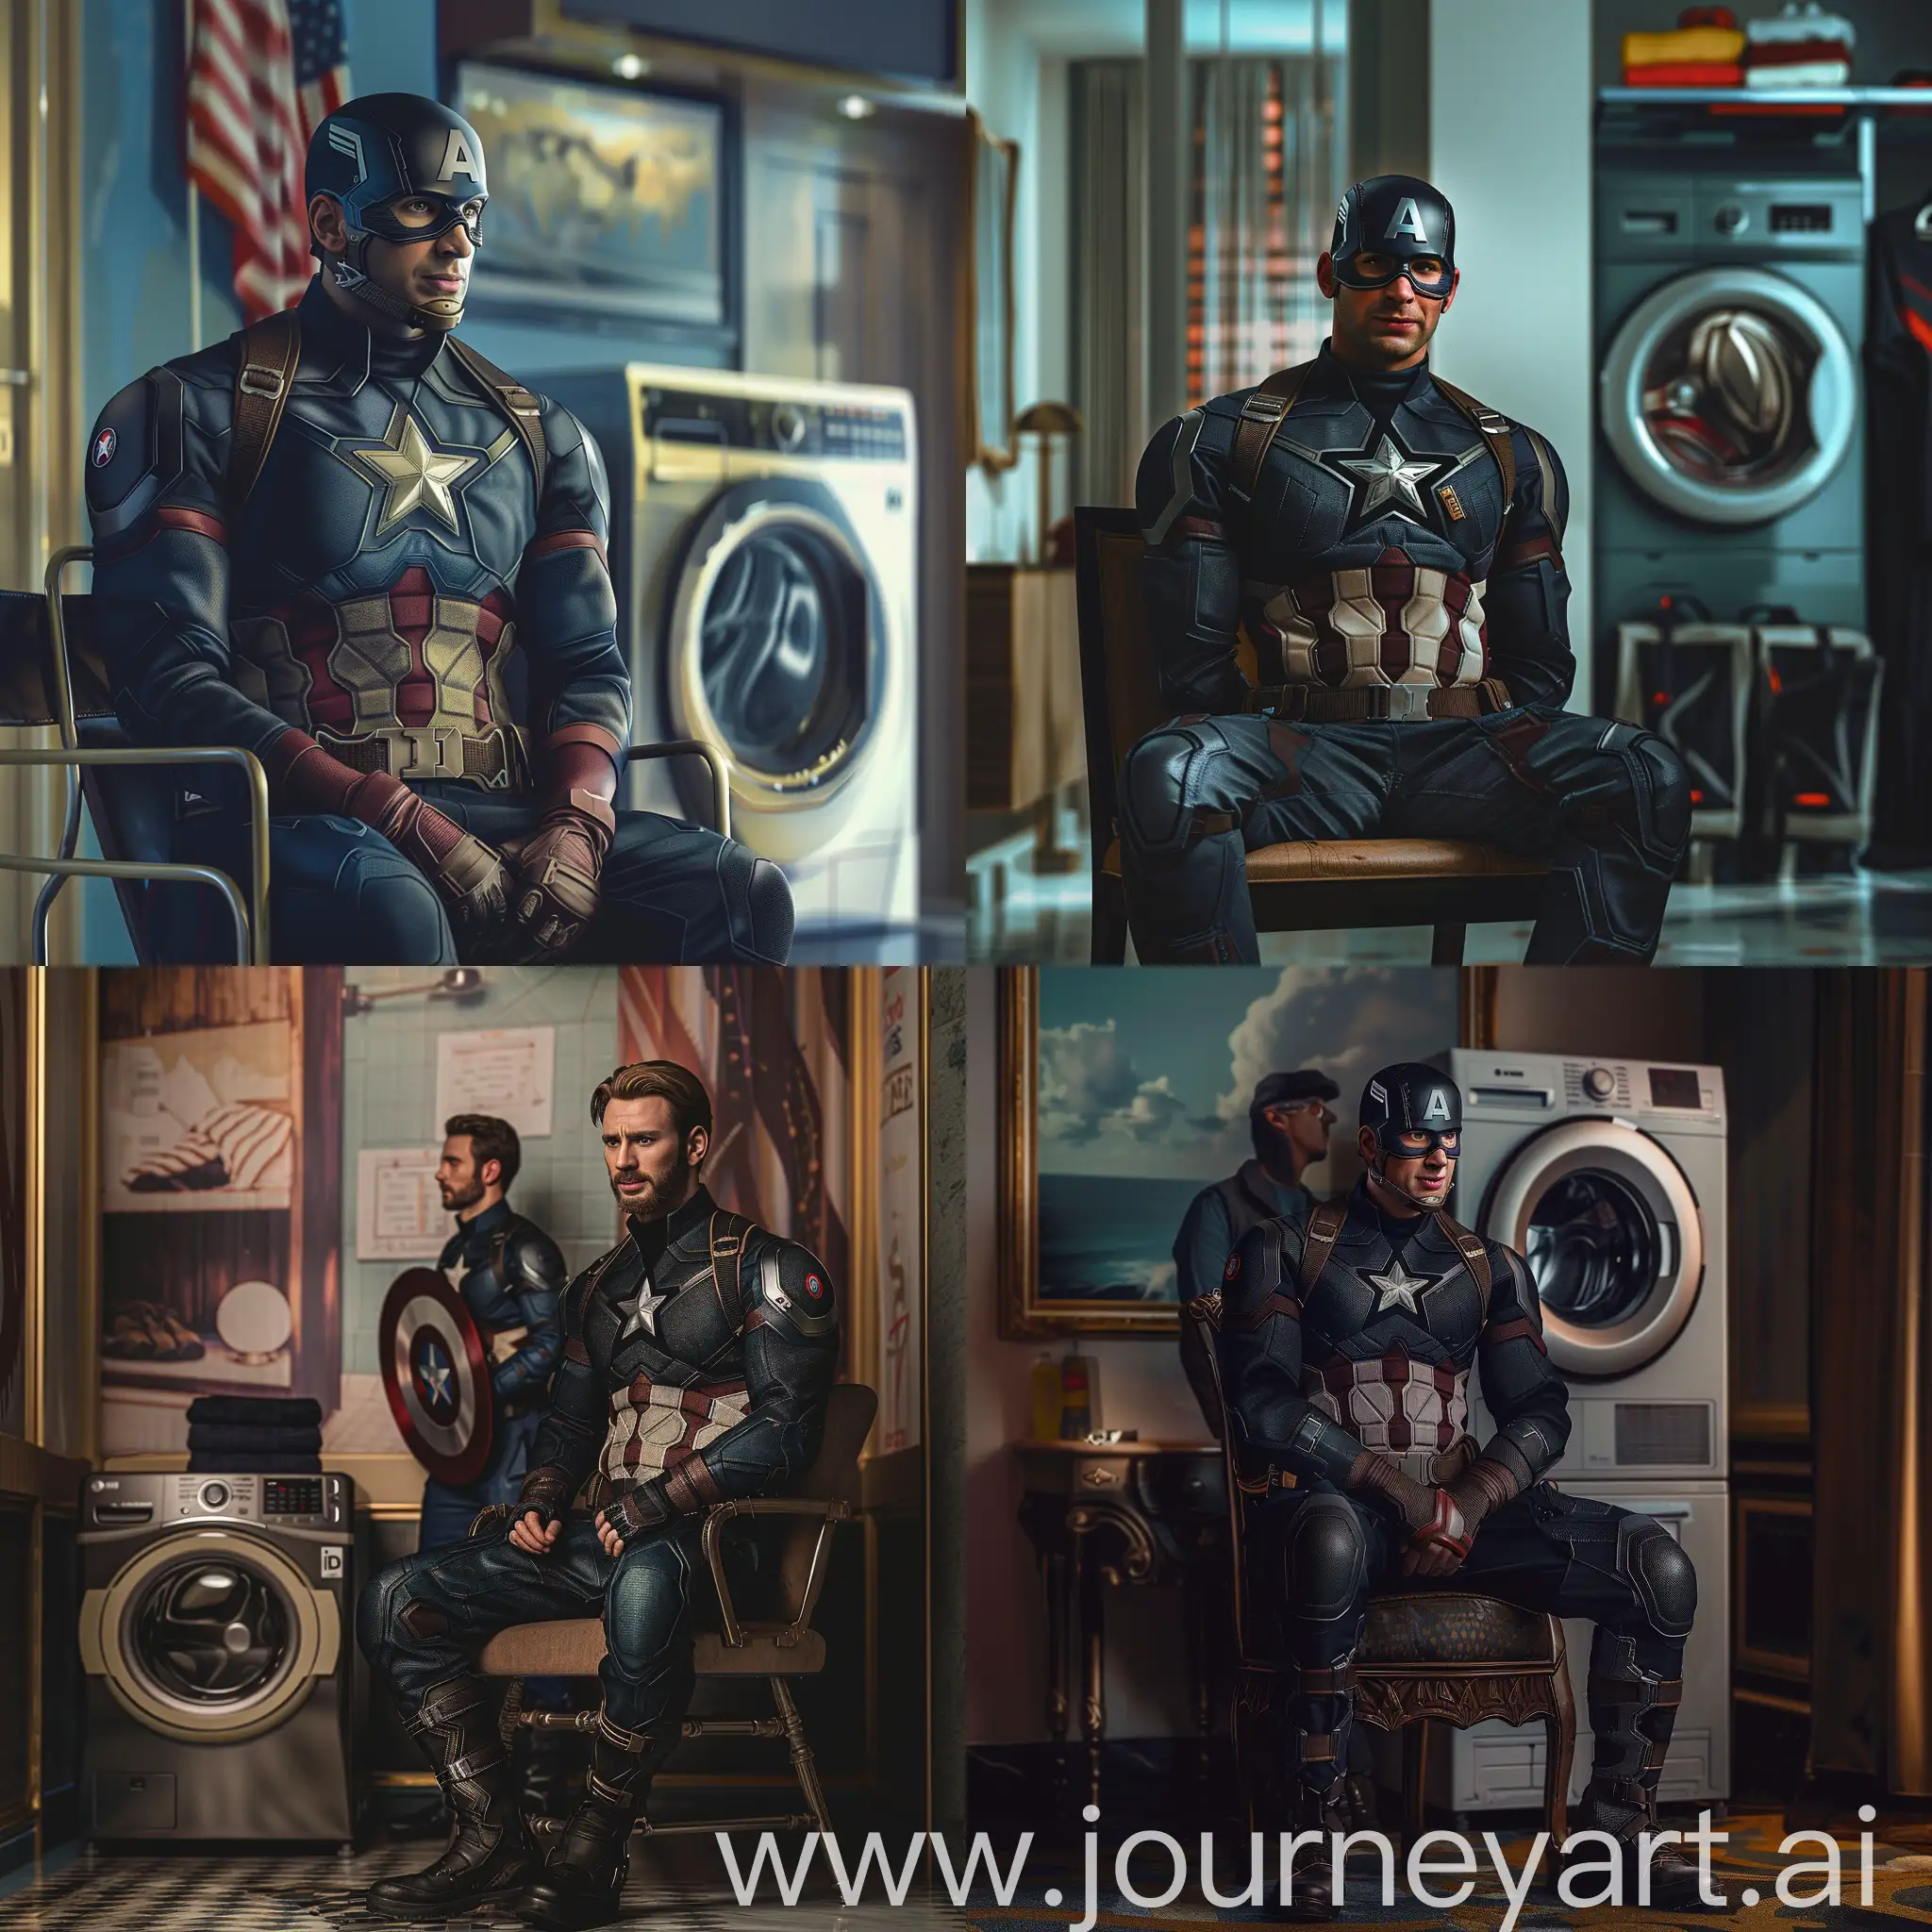 Captain-America-Smiling-in-Hotel-Room-While-Waiting-for-Washing-Machine-Repair